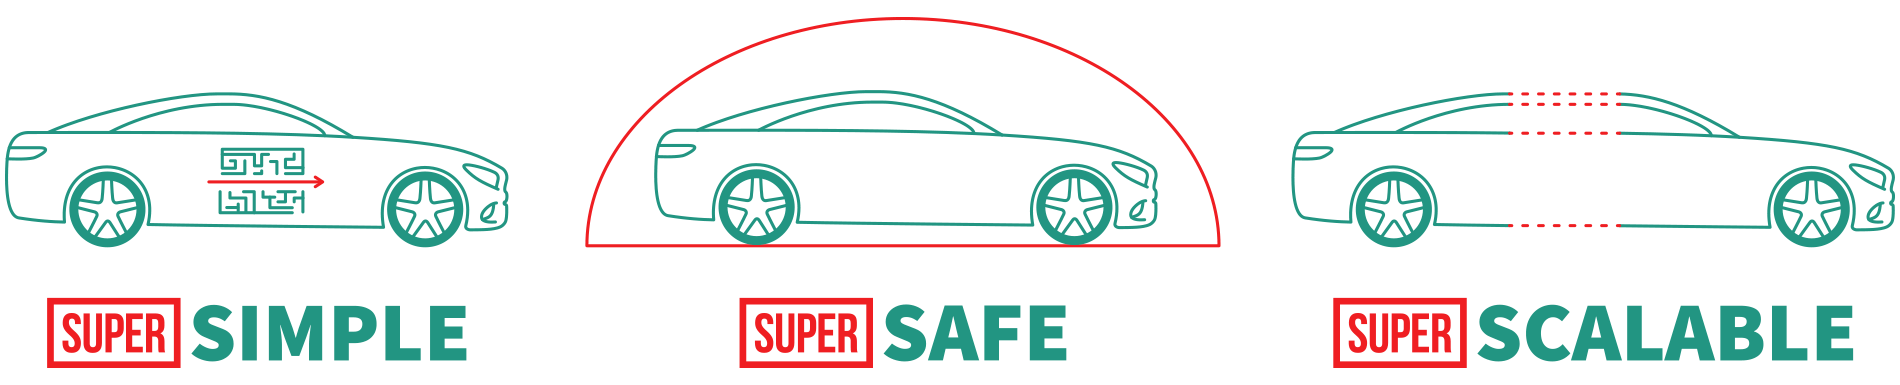 Superoperator simple safe scalable vector illustration with three cars